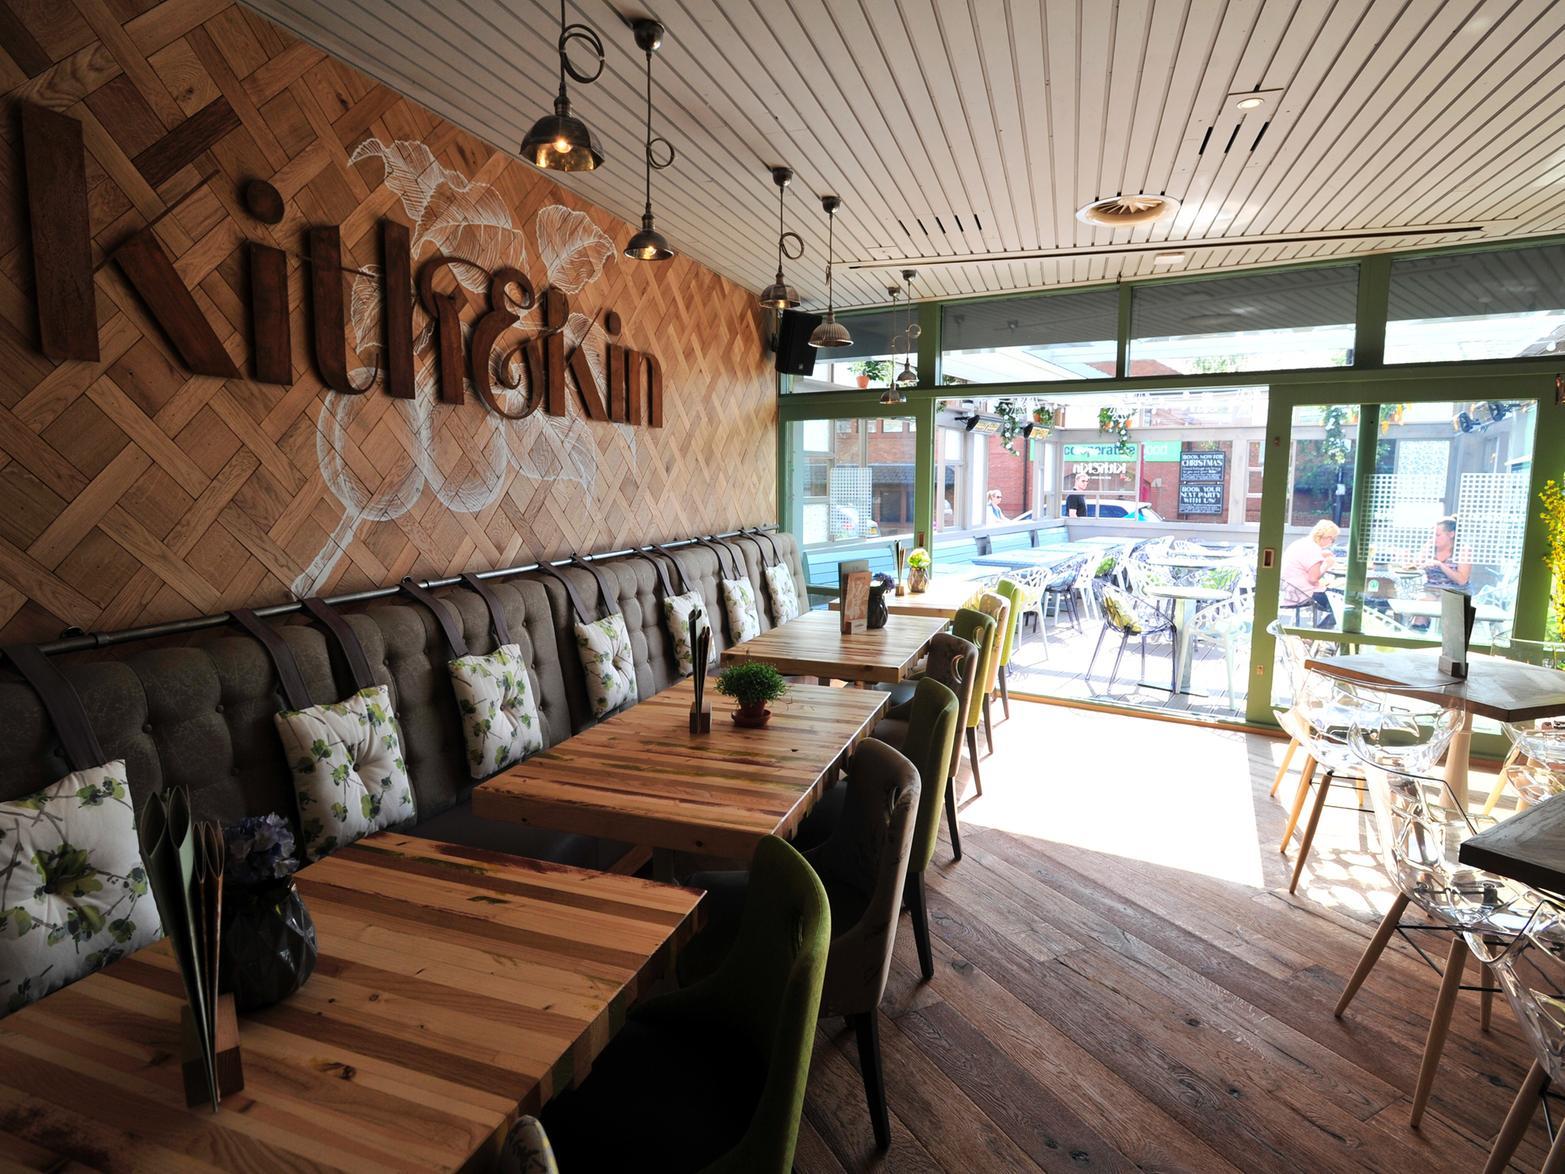 Kith and Kin on Steinbeck Road came in fourteenth.